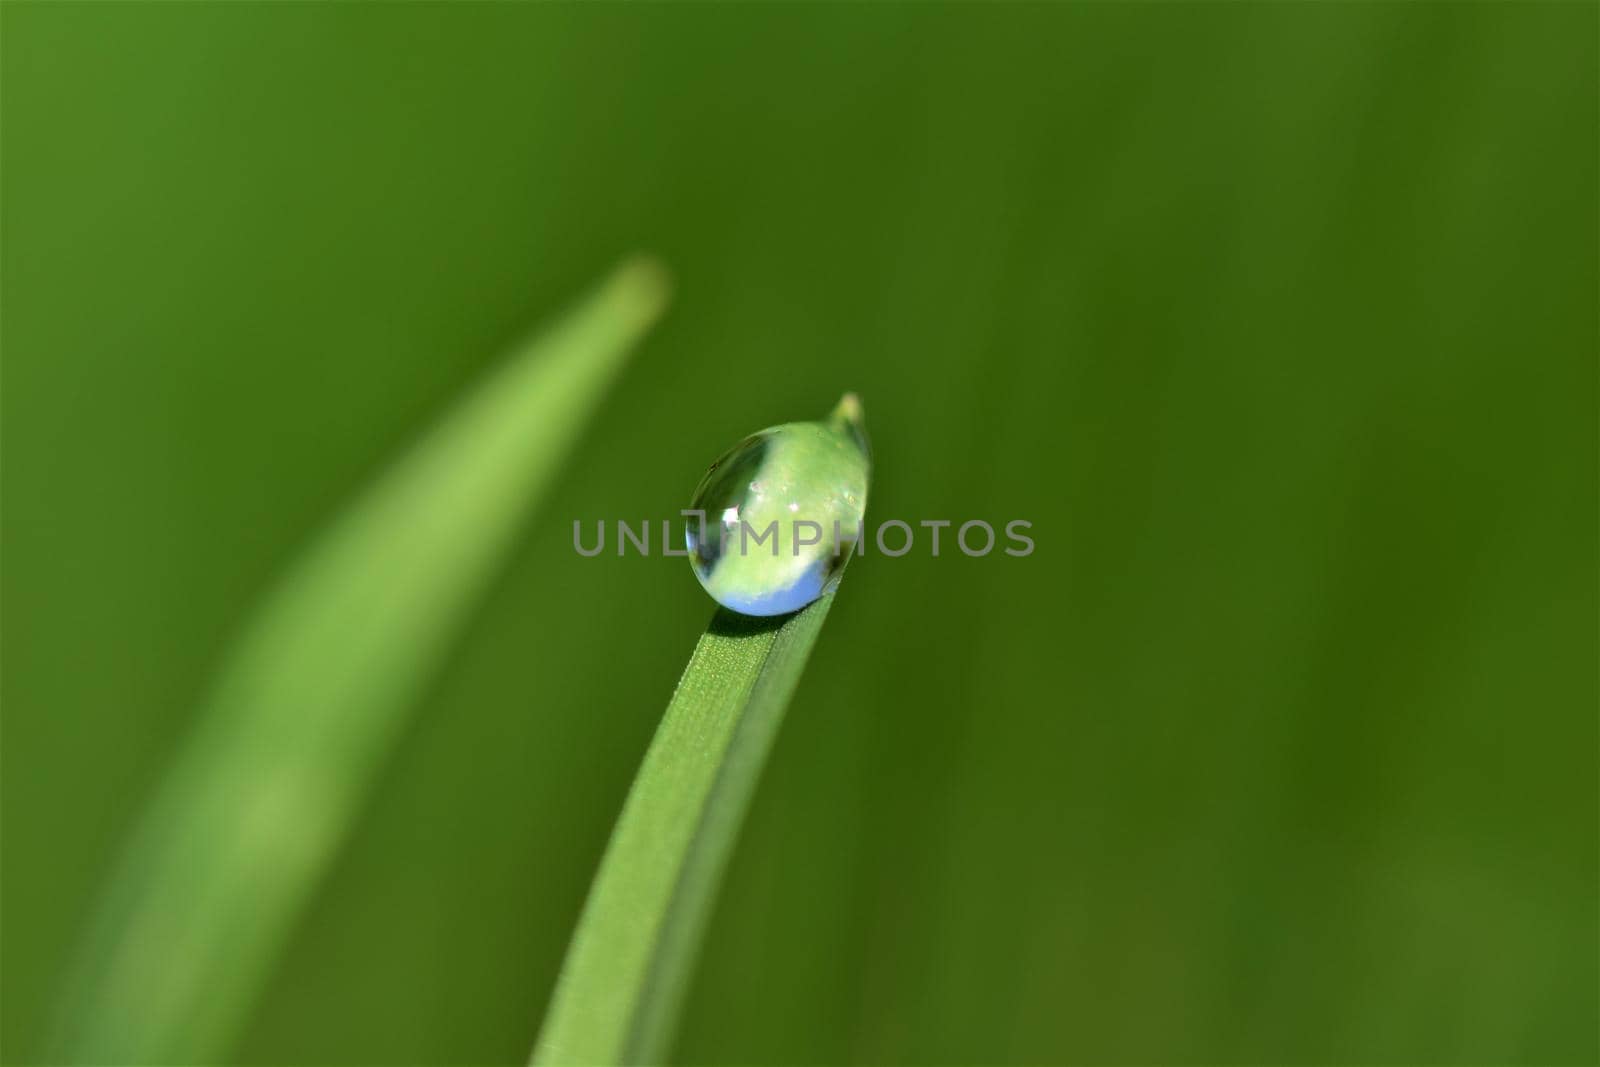 Dew drop on blade of grass against a green blurred background by Luise123